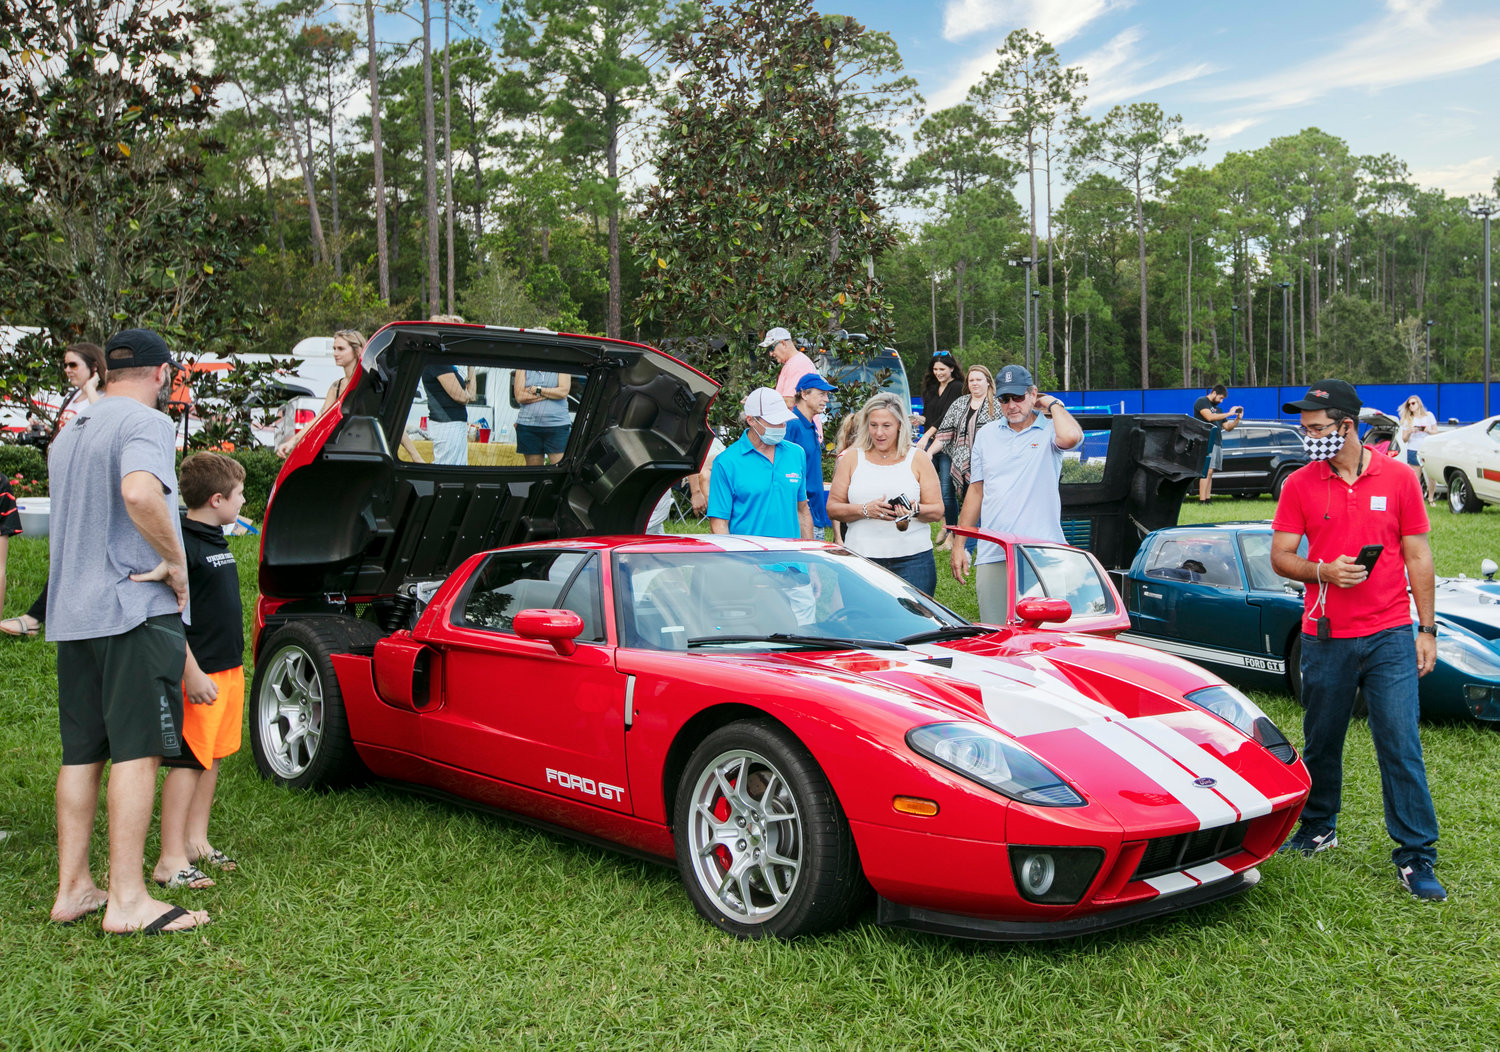 The Ford GTs were popular cars.